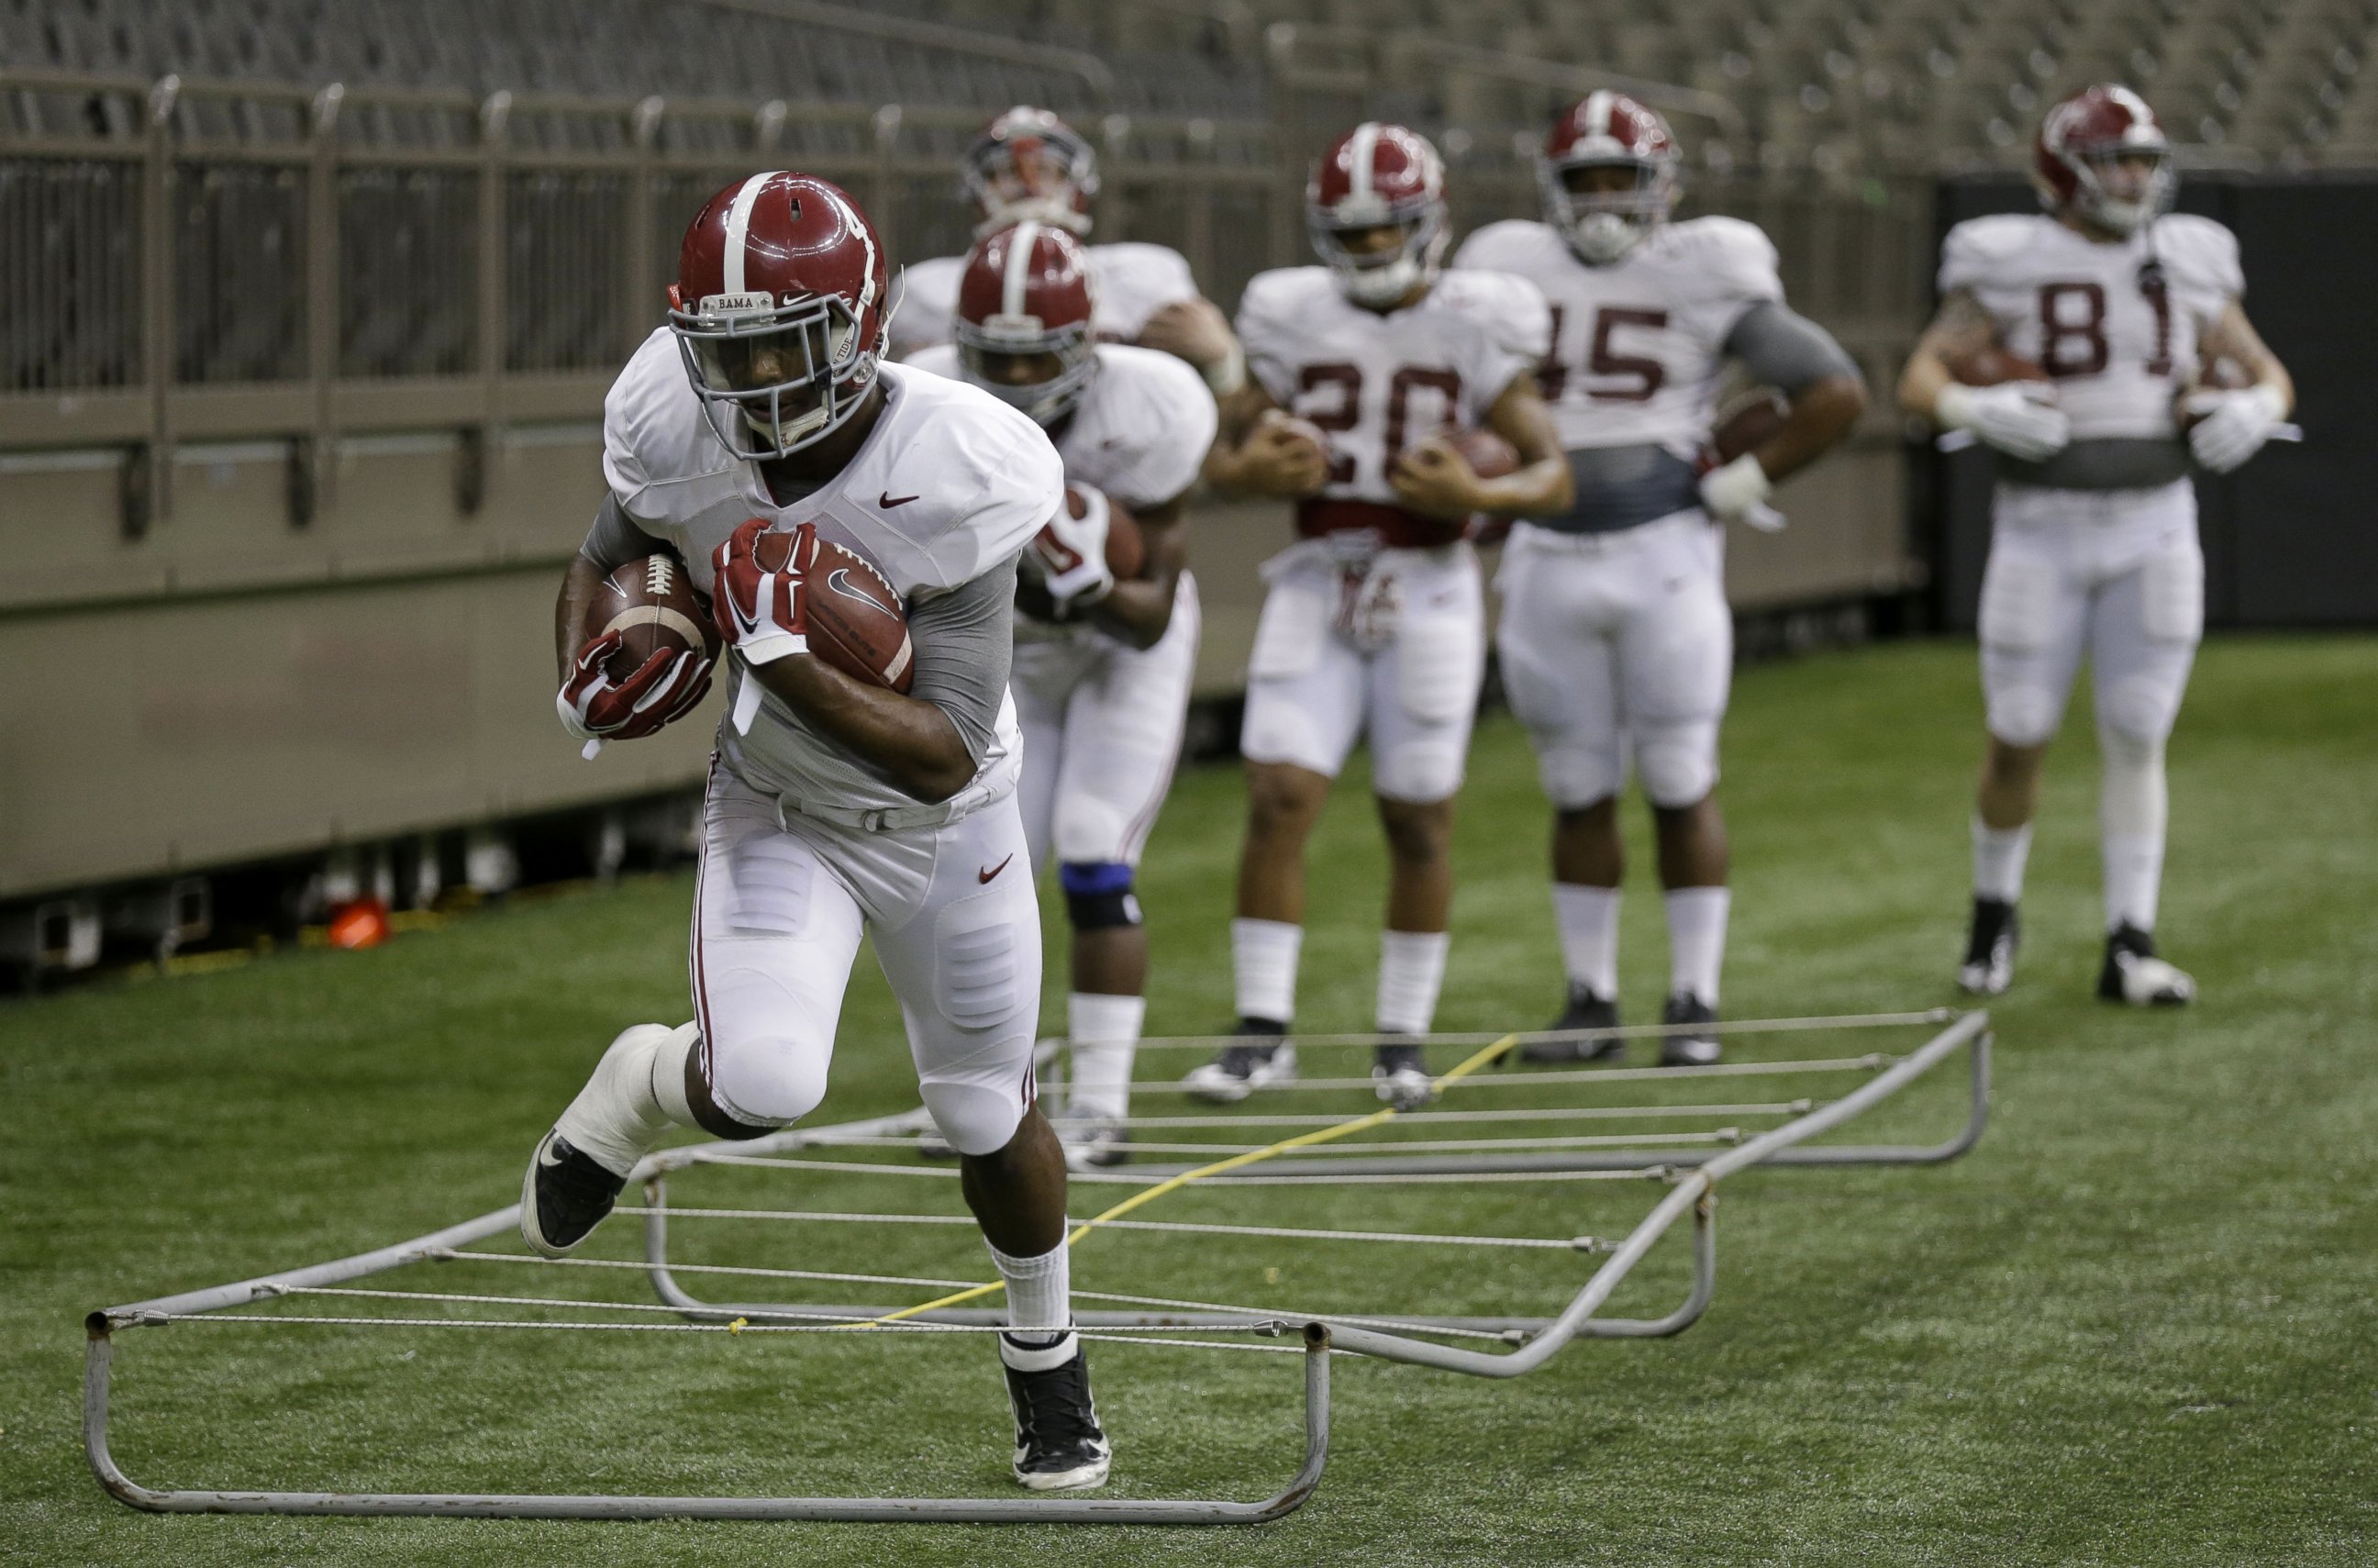 Alabama running back T.J. Yeldon (4) goes through drills during NCAA college football practice at the Mercedes-Benz Superdome in New Orleans, La., Sunday, Dec. 28, 2014. Alabama is scheduled to play Ohio State in the Sugar Bowl on Jan. 1, 2015.